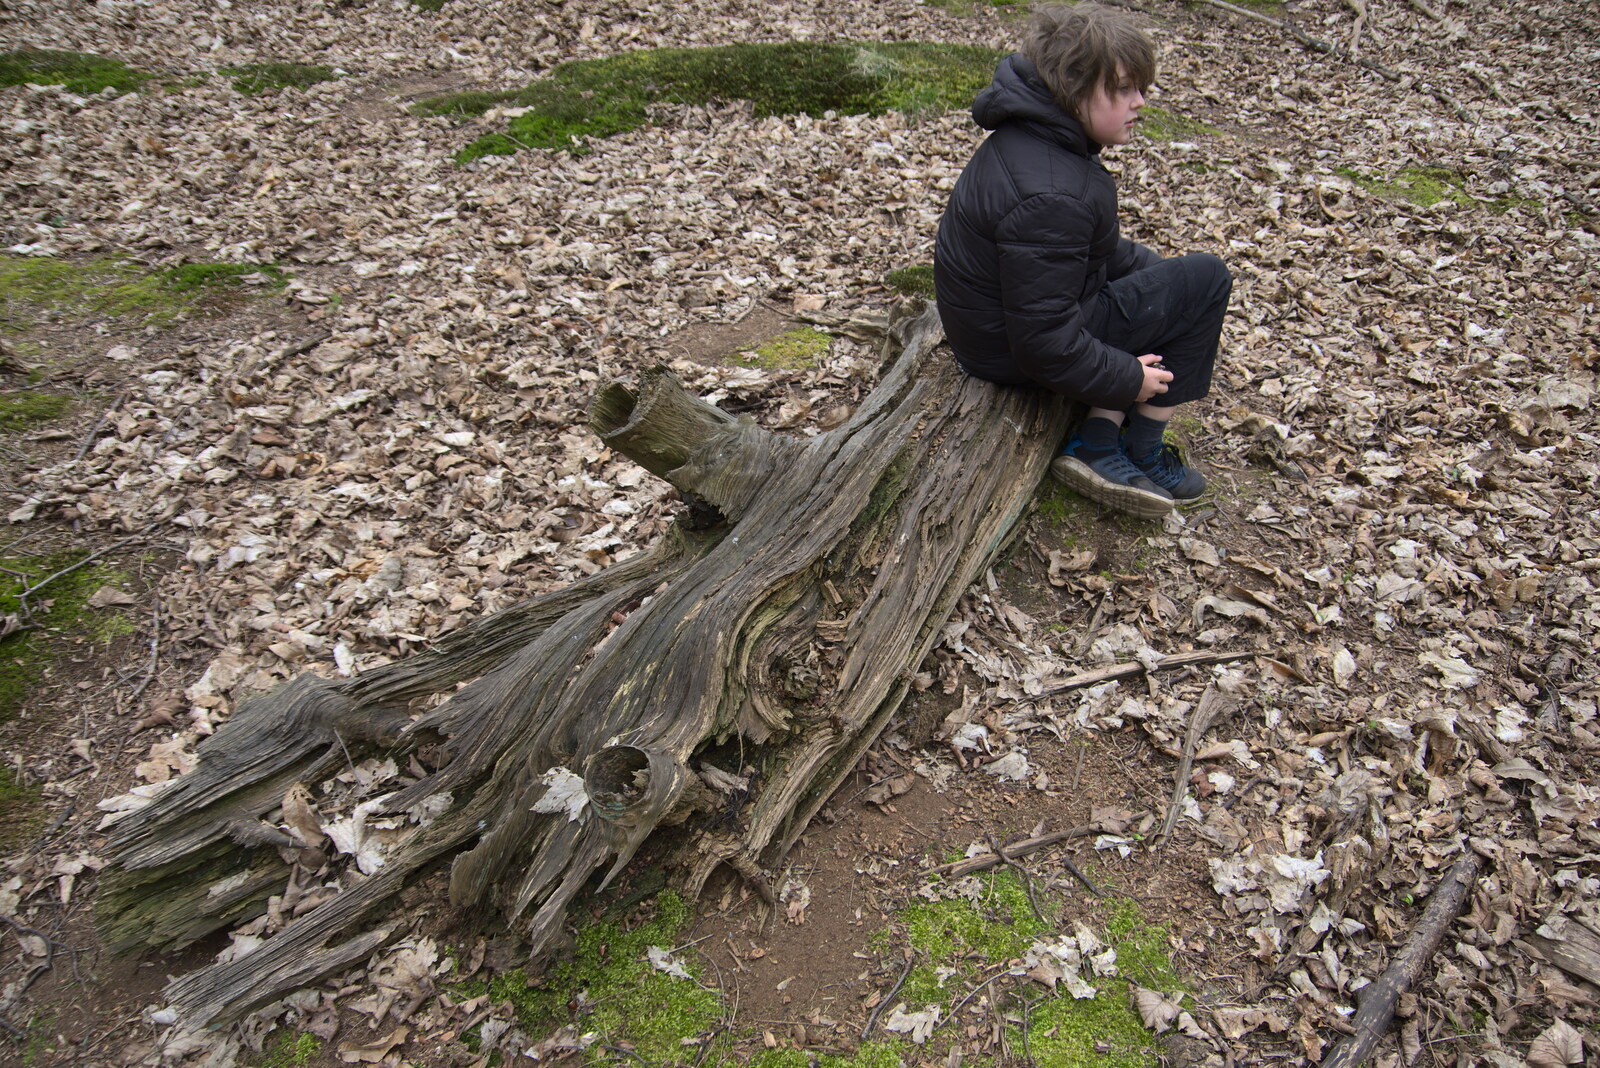 Fred sits on a log from A Trip to Dunwich Beach, Dunwich, Suffolk - 2nd April 2021